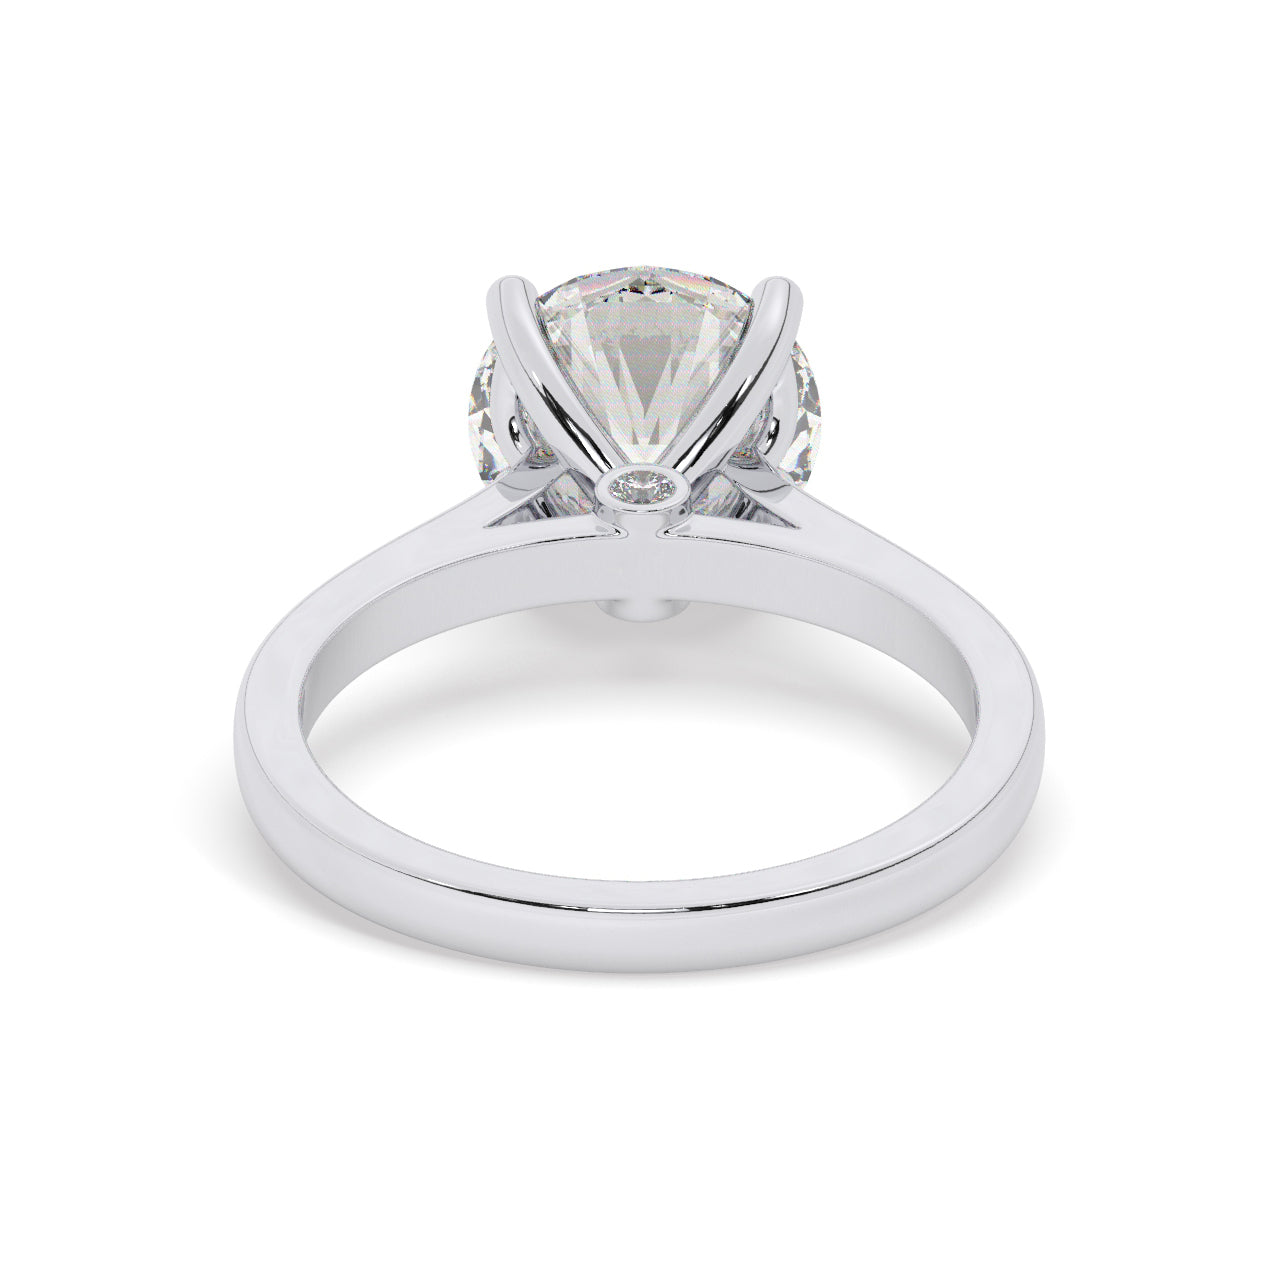 White Gold Round Cut Solitaire Engagement Ring with a Hidden Stone - Back View